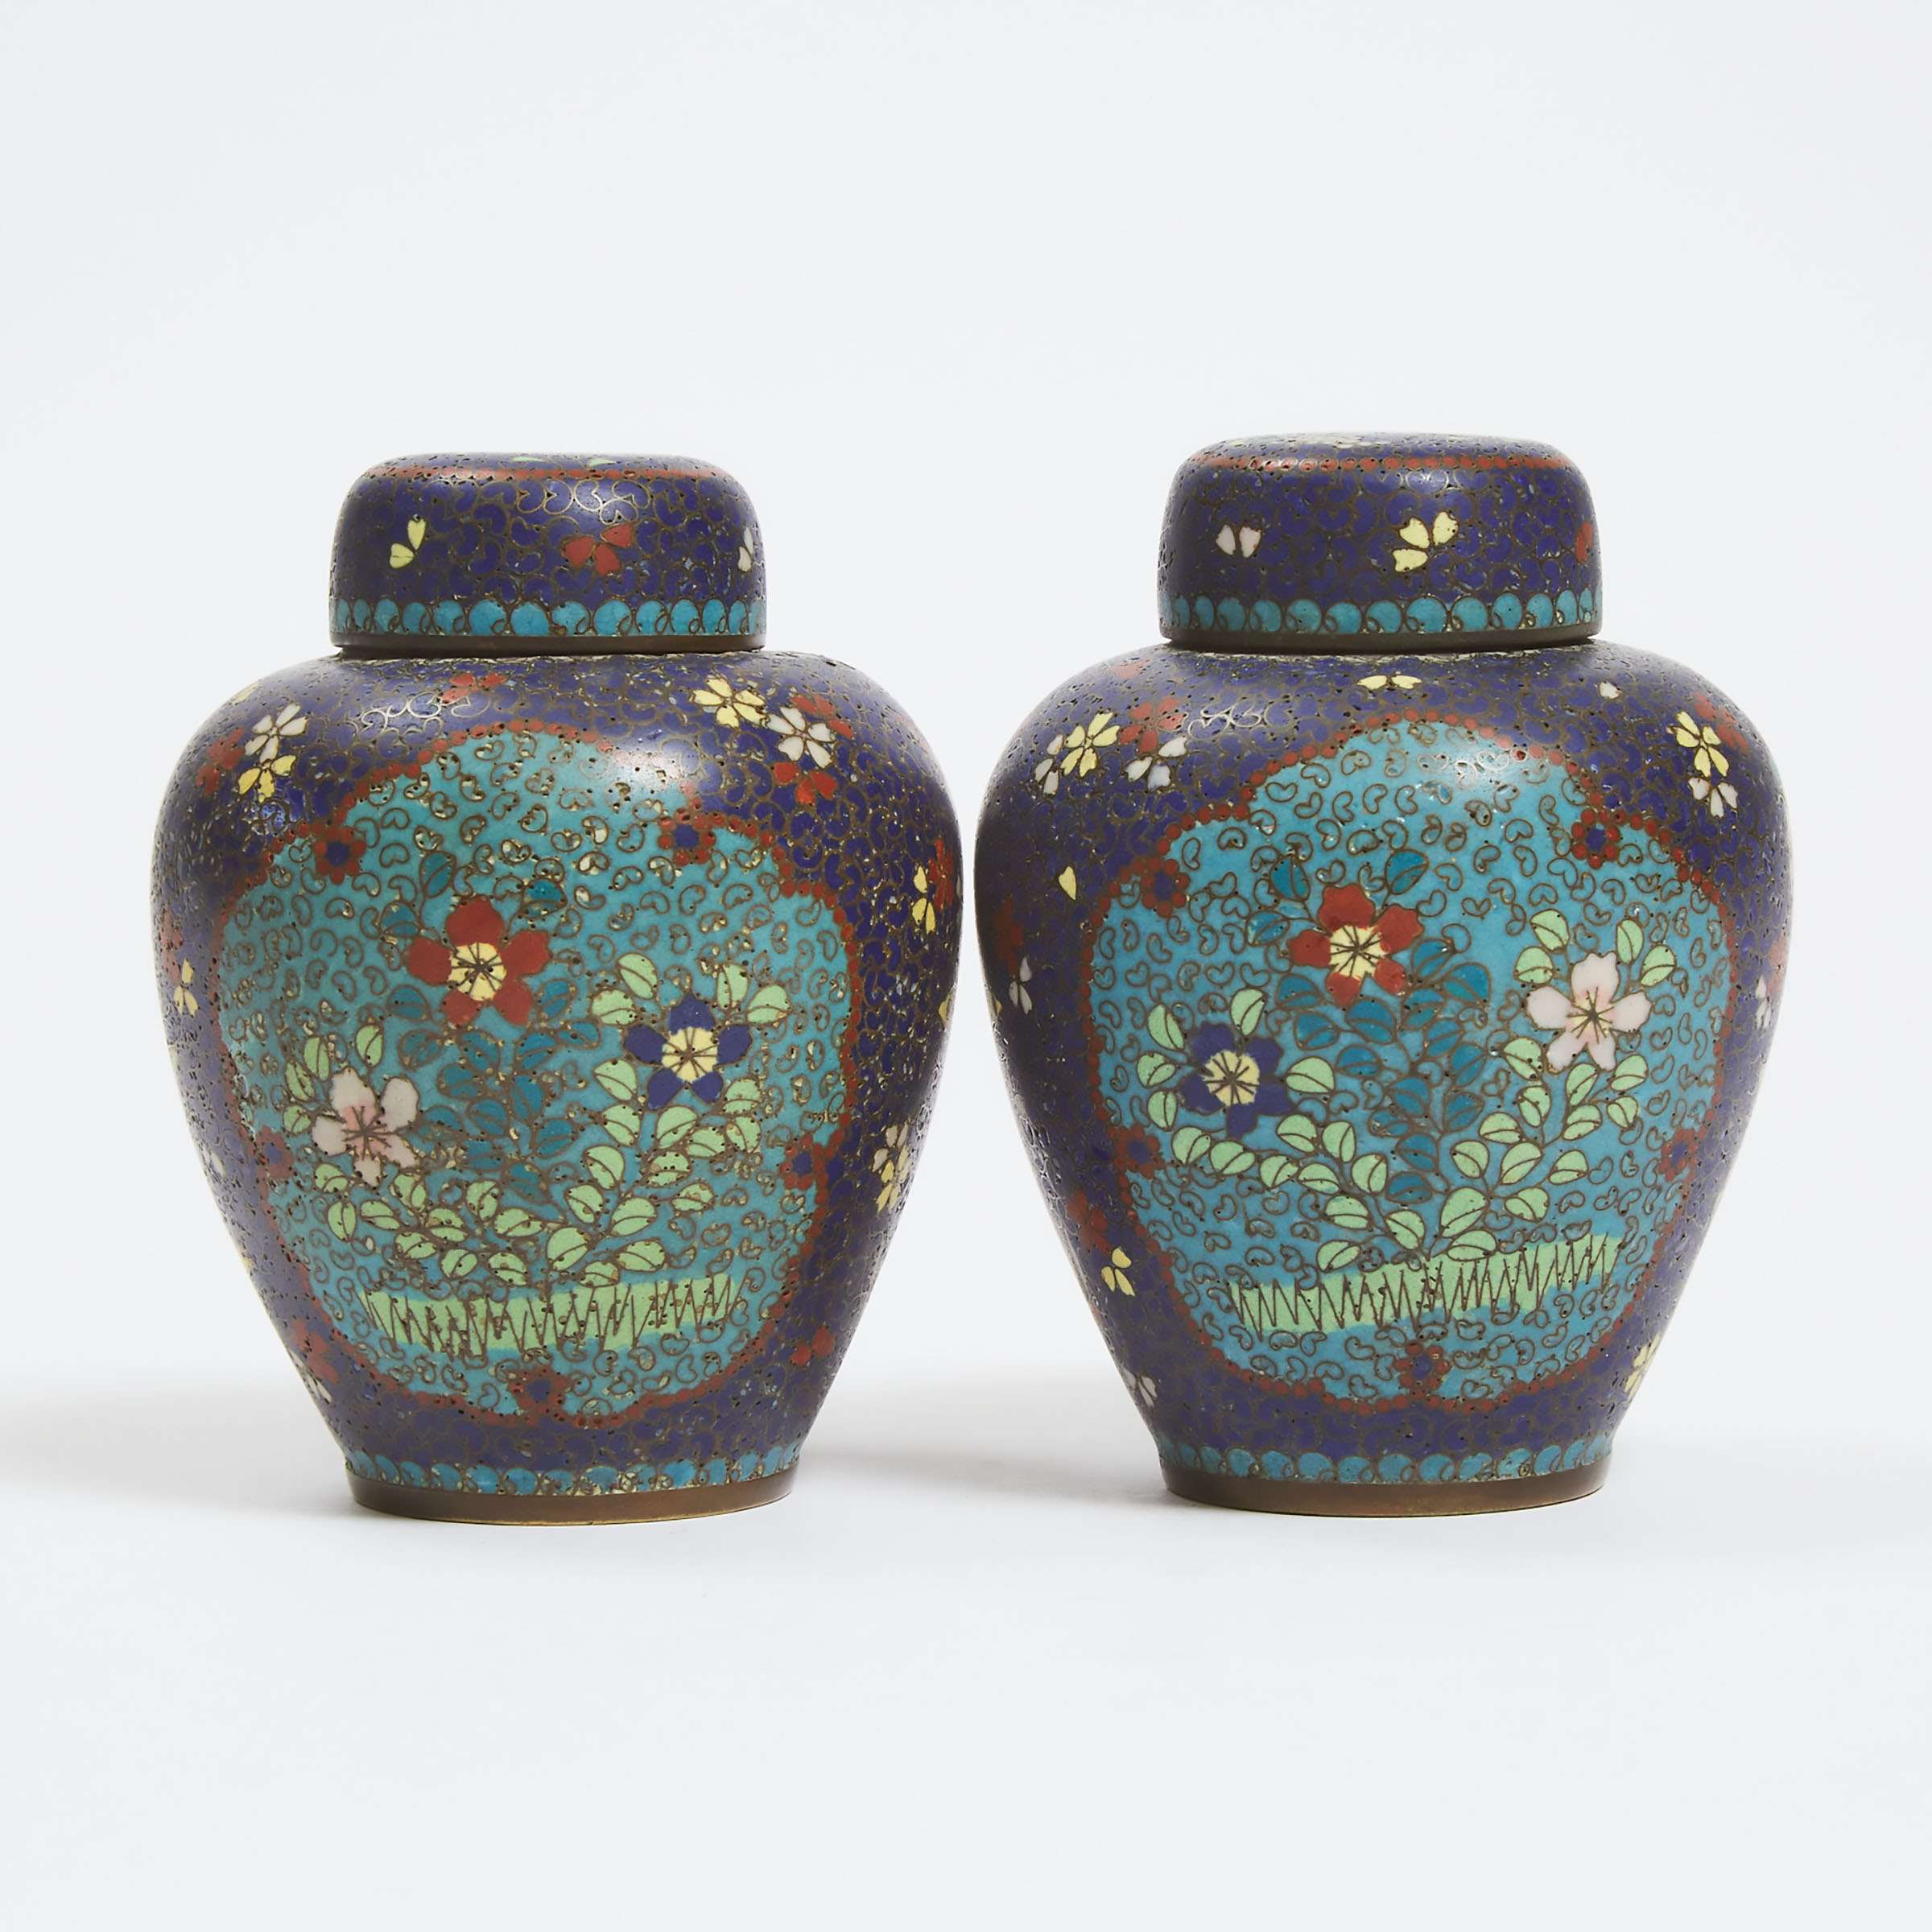 A Pair of Chinese Cloisonné Lidded Jars, Late Qing Dynasty, 19th Century